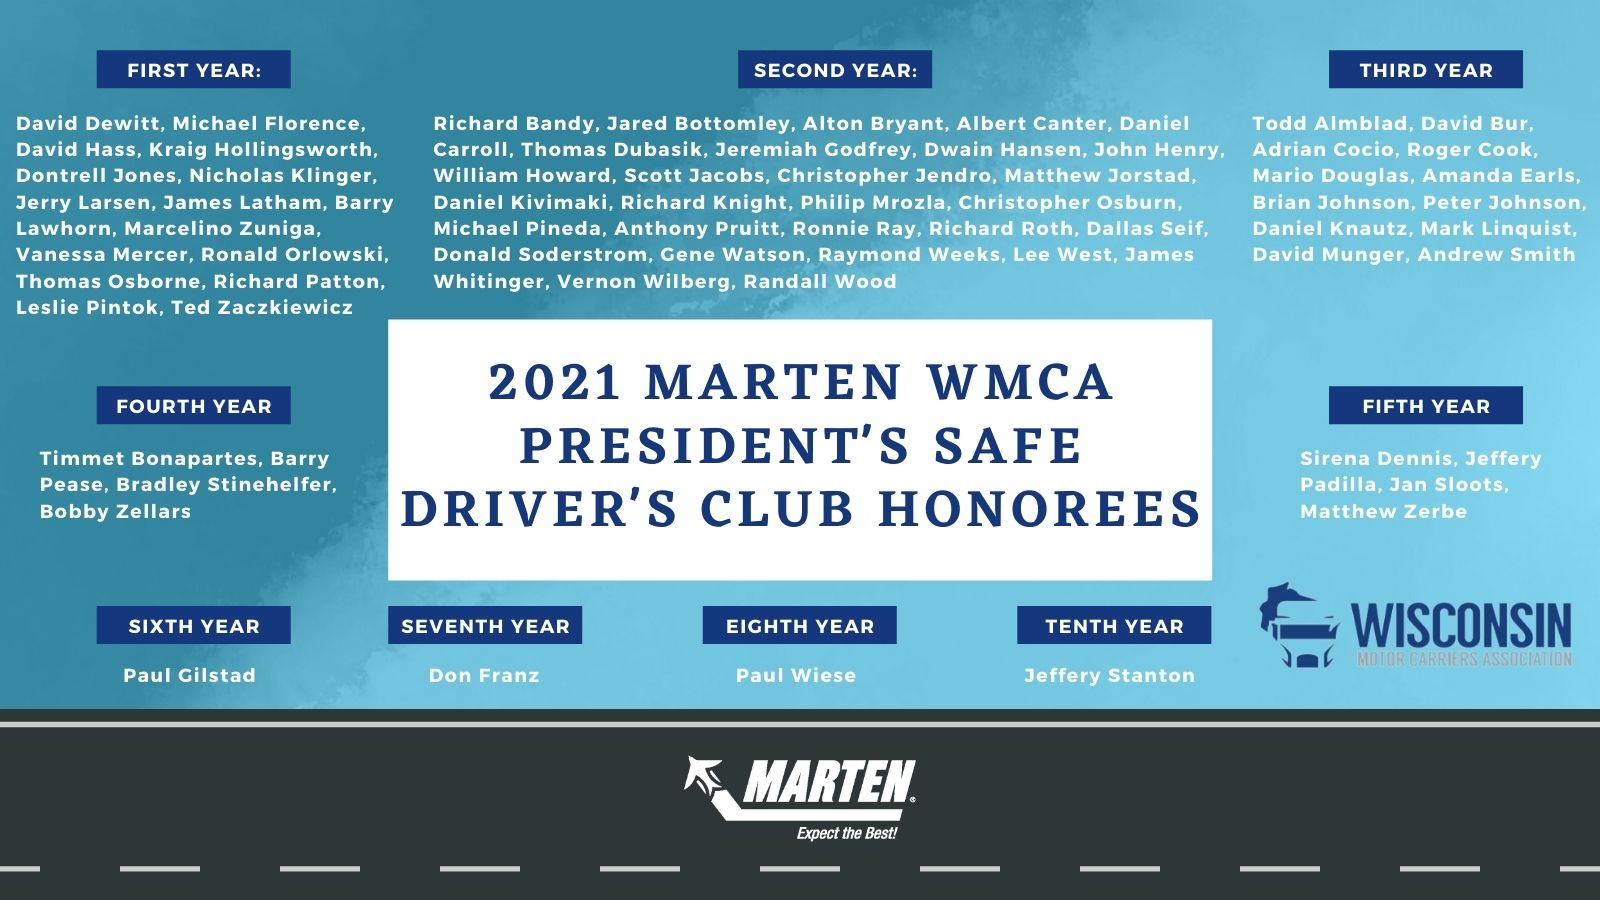 Marten WMCA President's Safe Driver's Club Honorees